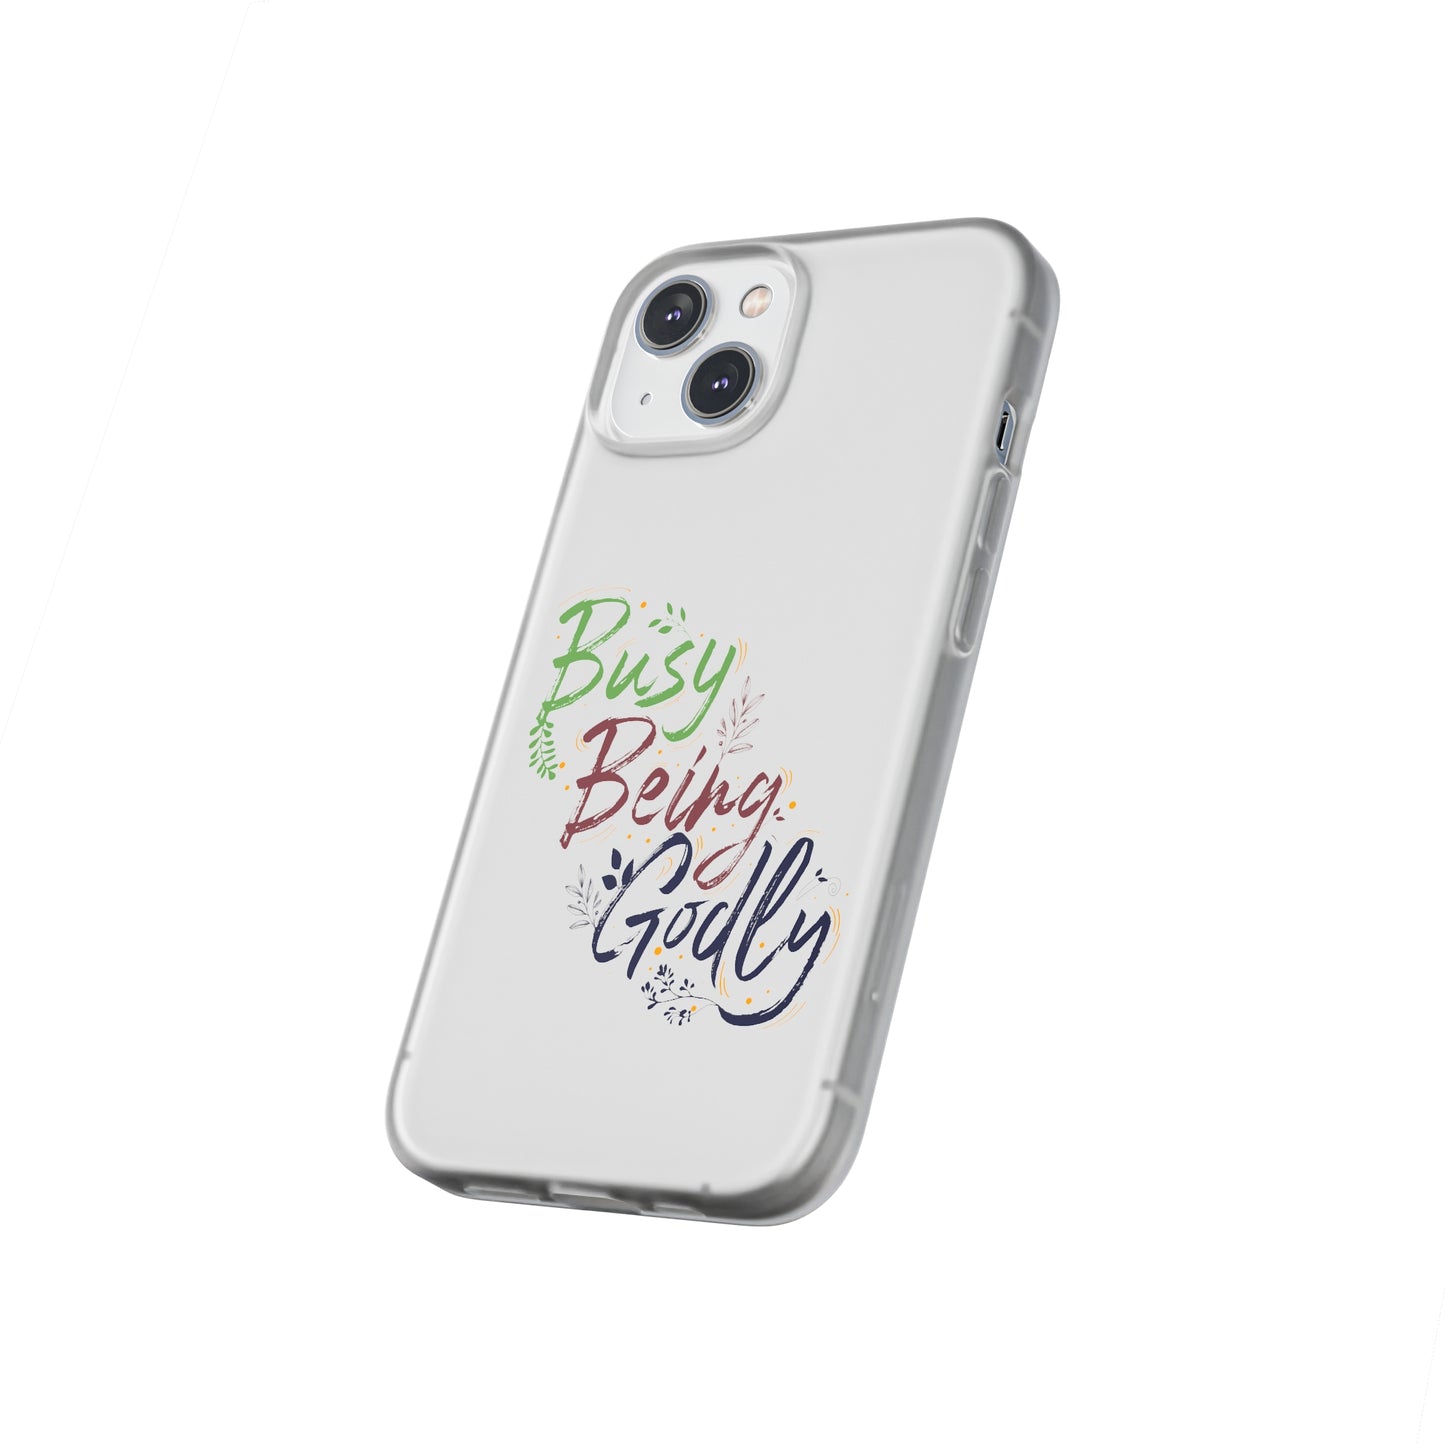 Busy Being Godly Flexi Phone Case